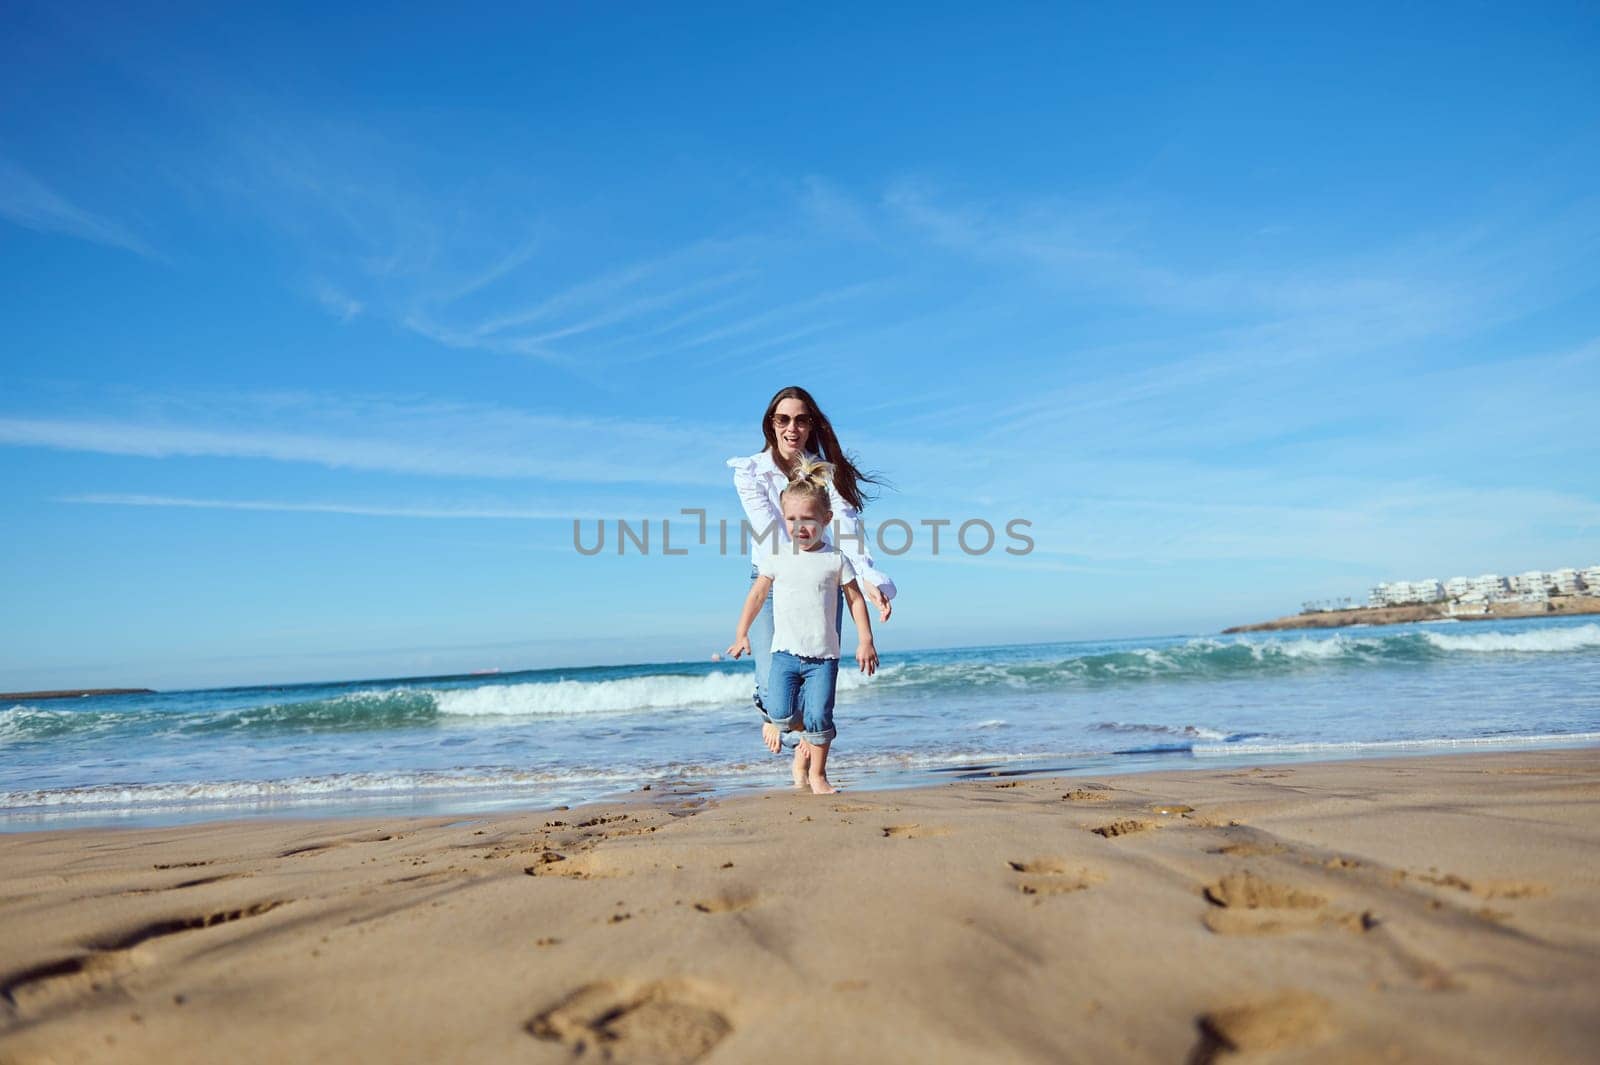 Cheerful mom catching her daughter while running barefoot, playing together on the beach, leaving footsteps on the wet sand, washed by waves splashing while crashing on sea shore. People. Lifestyle